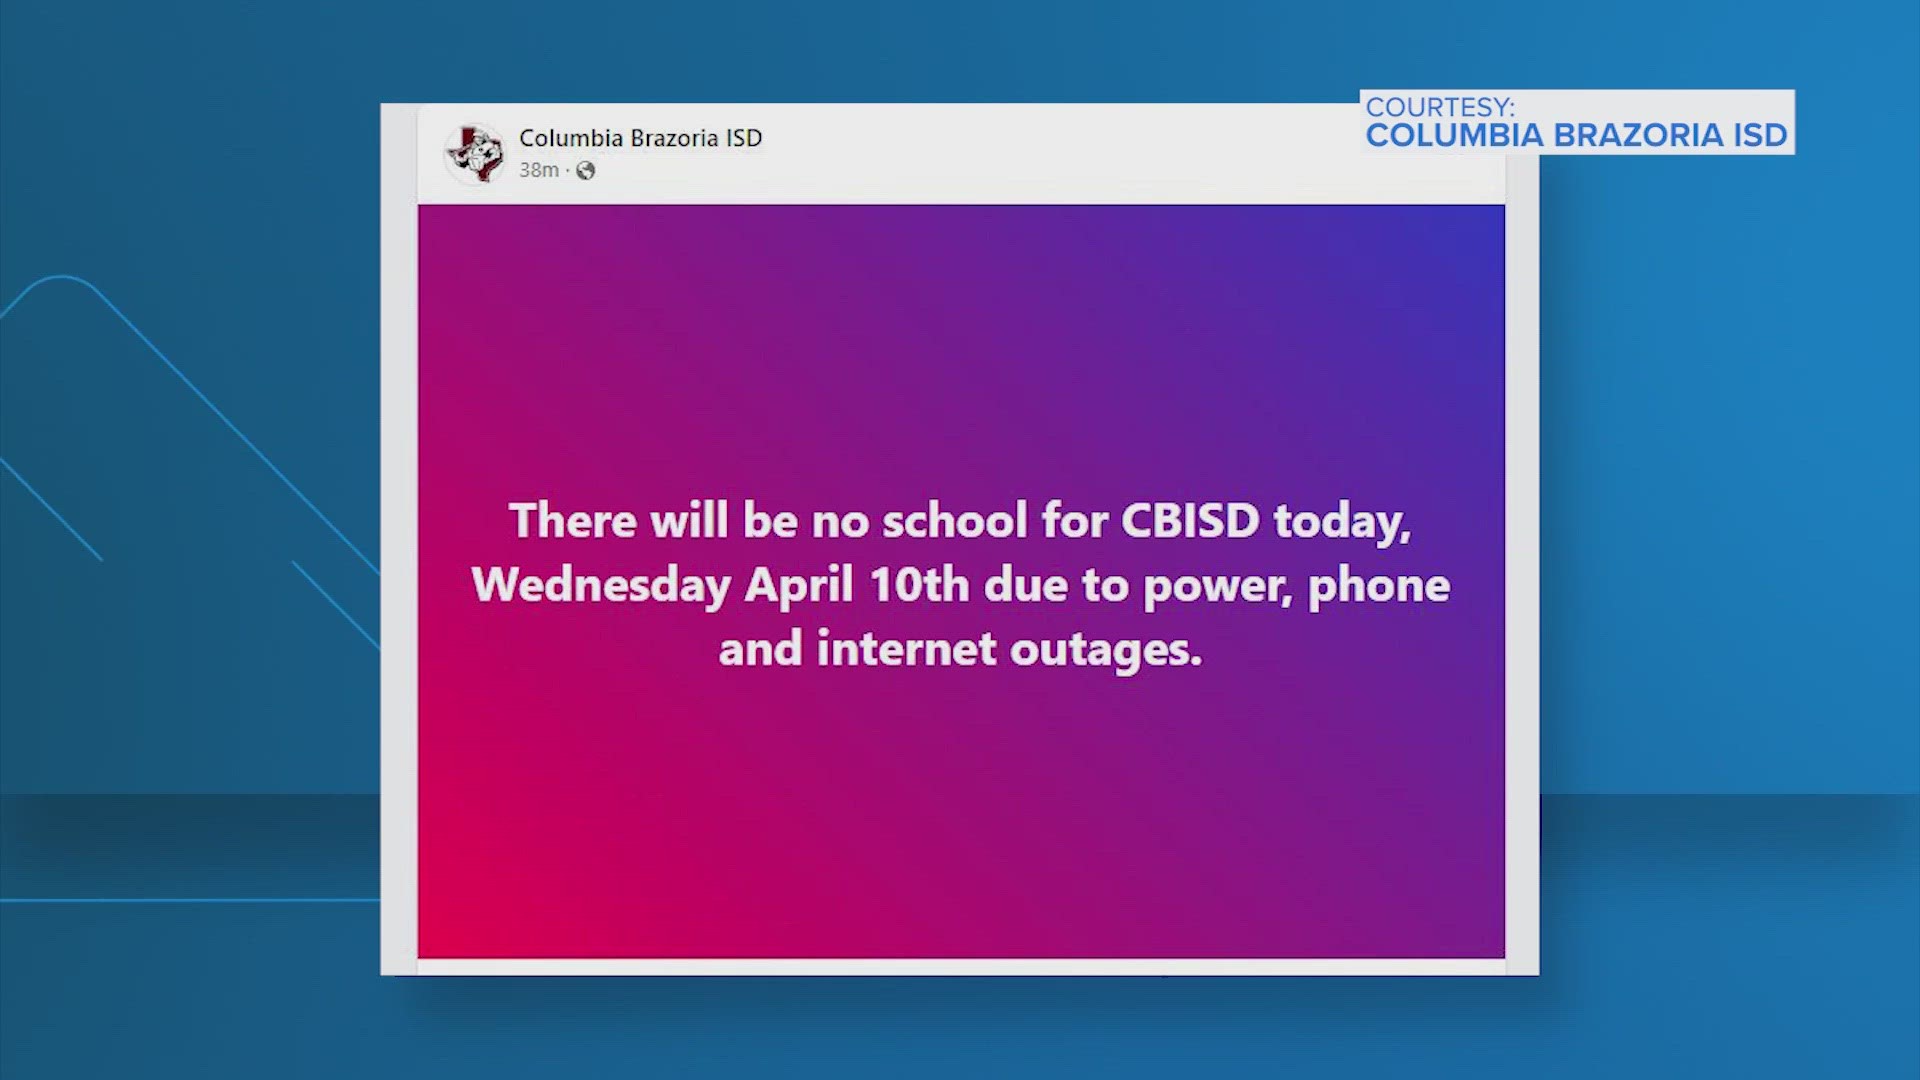 Lone Star College-Atascocita Center will start at 9 a.m. and Columbia Brazoria ISD canceled classes due to outages.